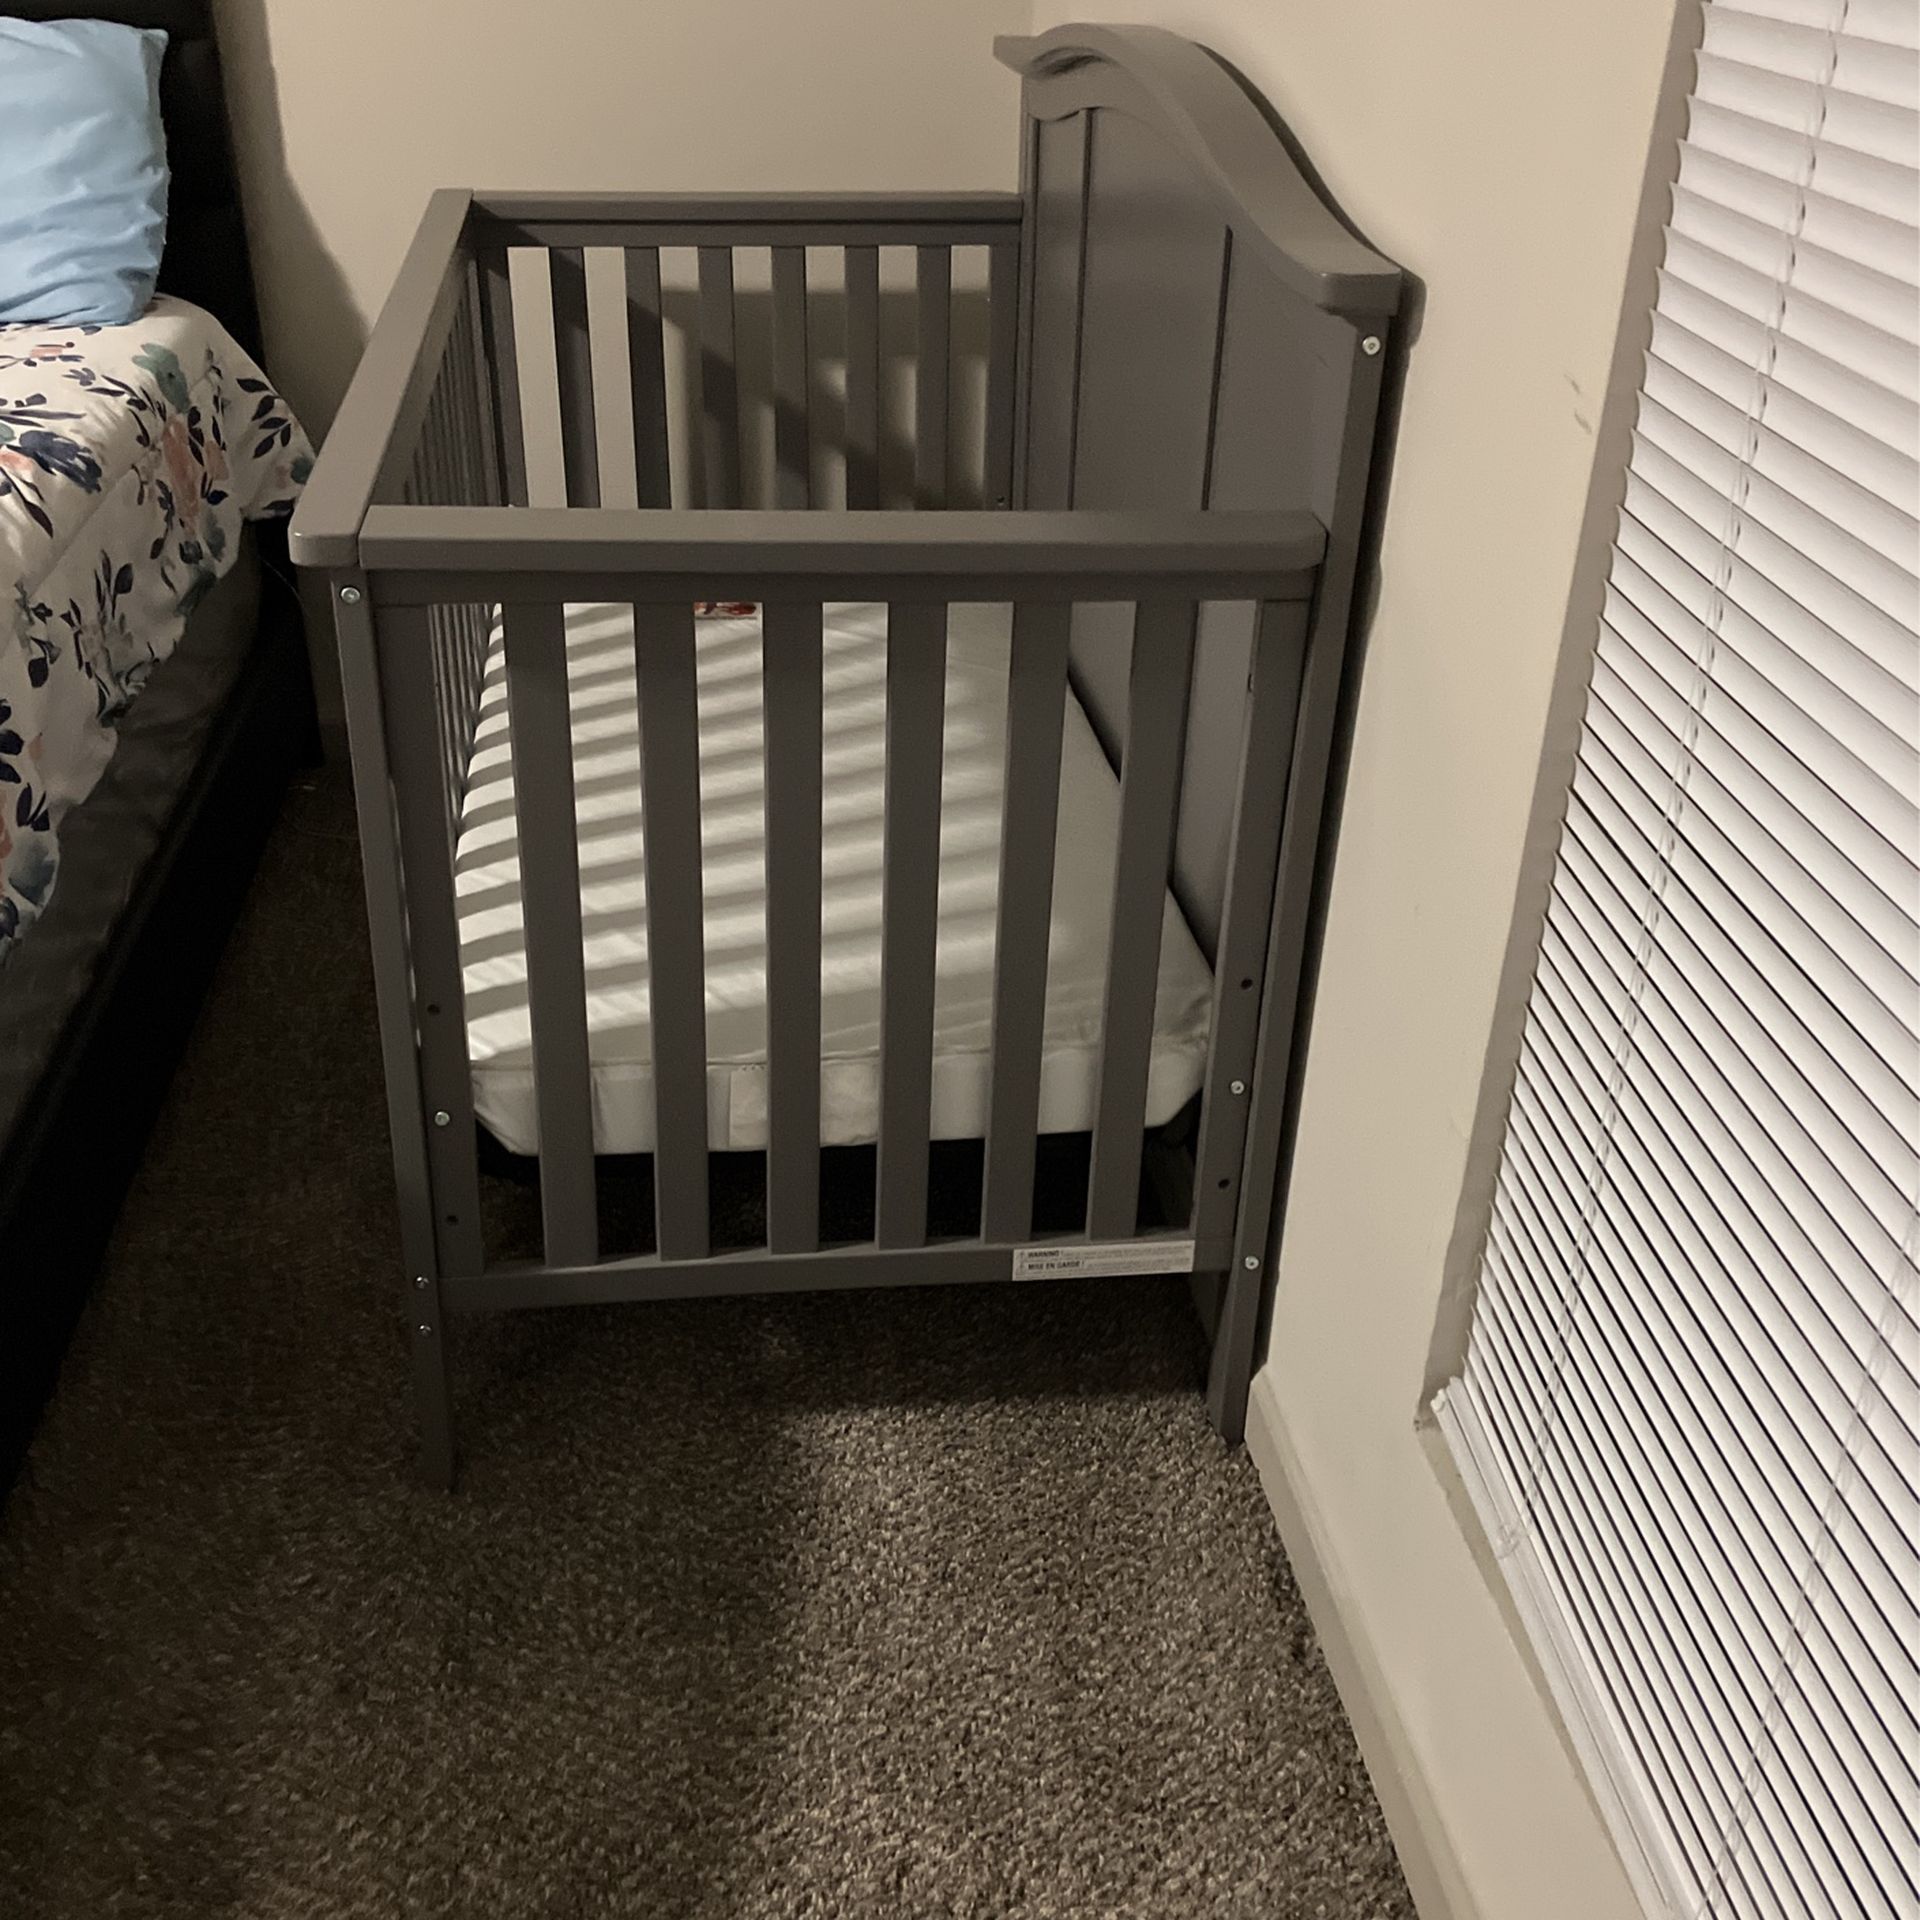 4 in 1 Crib and Changing Table